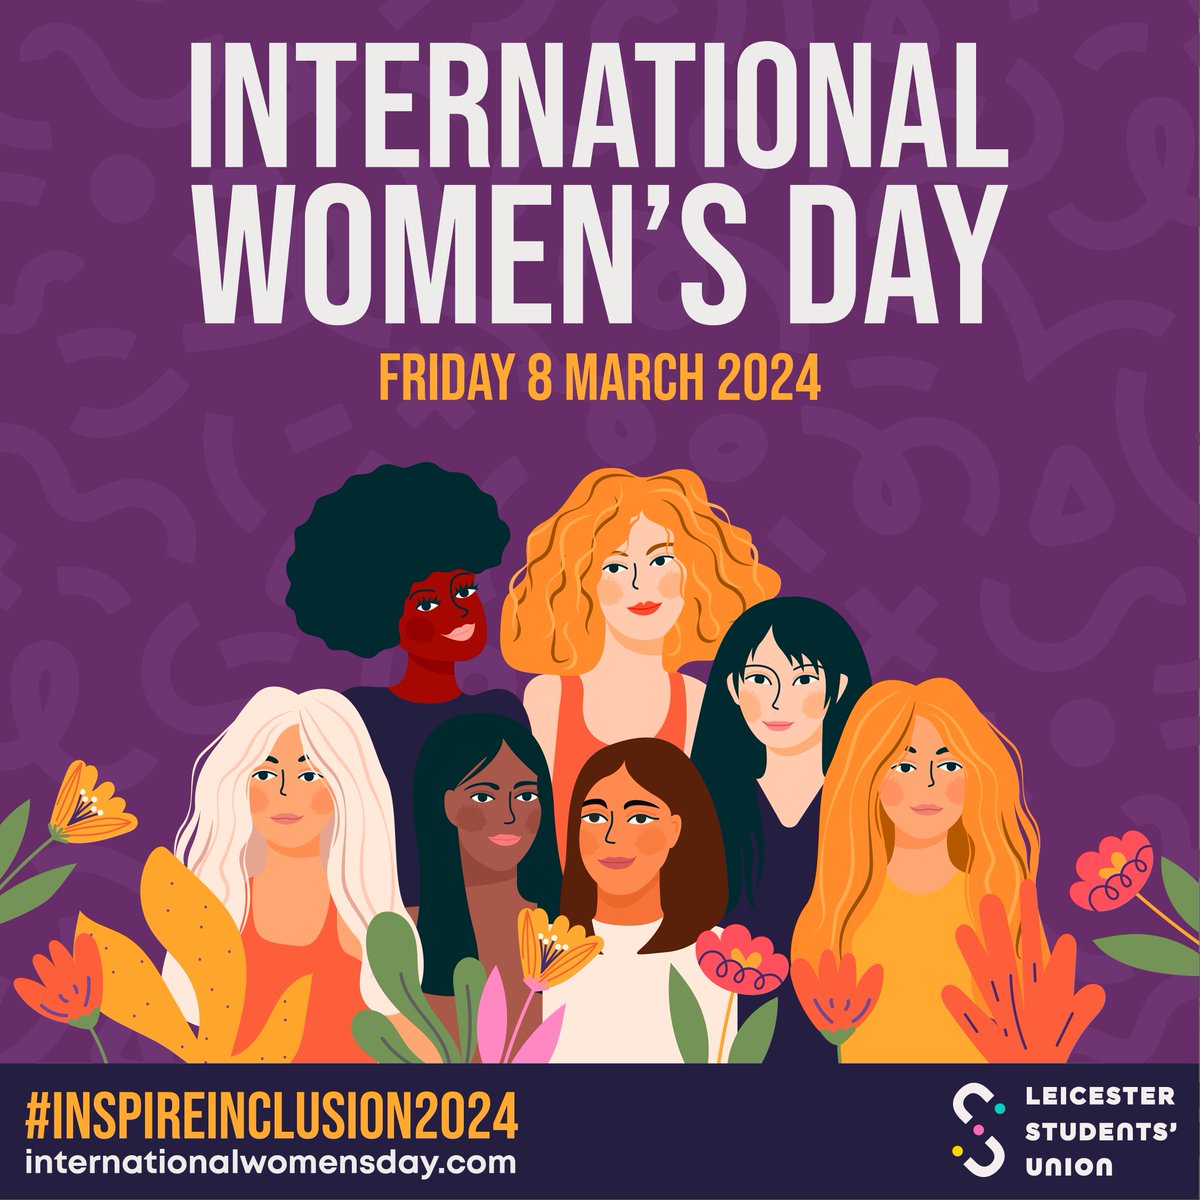 Happy International Women's Day! 💪🌍 International Women's Day is celebrated worldwide annually to bring attention to the women's rights movement and issues women face in the current climate. #IWD2024 #InspireInclusion2024